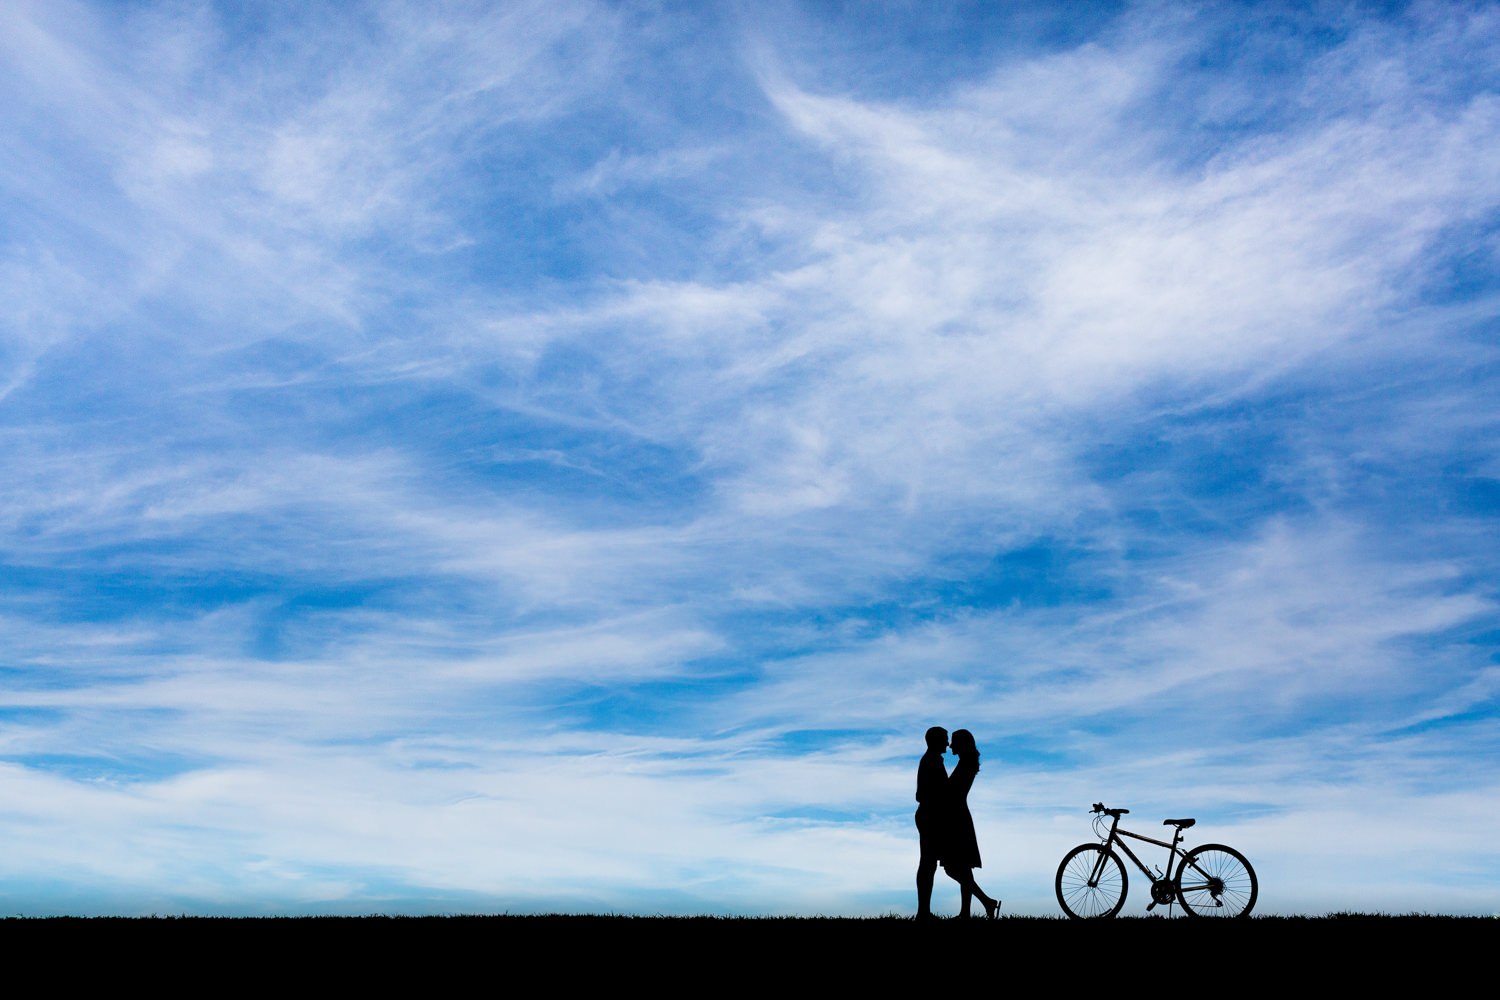 Alexandria Virginia engagement session, silhouette of an Indian bride and groom with their bicycle, they are cyclists, the photo shows mostly sky with the couple embracing and a bike profile behind them, the sky is full of stratus clouds and bright blue, Procopio Photography, best top Washington DC photographer, best top Maryland photographer, best top Virginia photographer, best top DMV photographer, best top wedding photographer, best top commercial photographer, best top portrait photographer, best top boudoir photographer, modern fine art portraits, dramatic, unique, different, bold, editorial, photojournalism, award winning photographer, published photographer, memorable images, be different, stand out, engagement photography